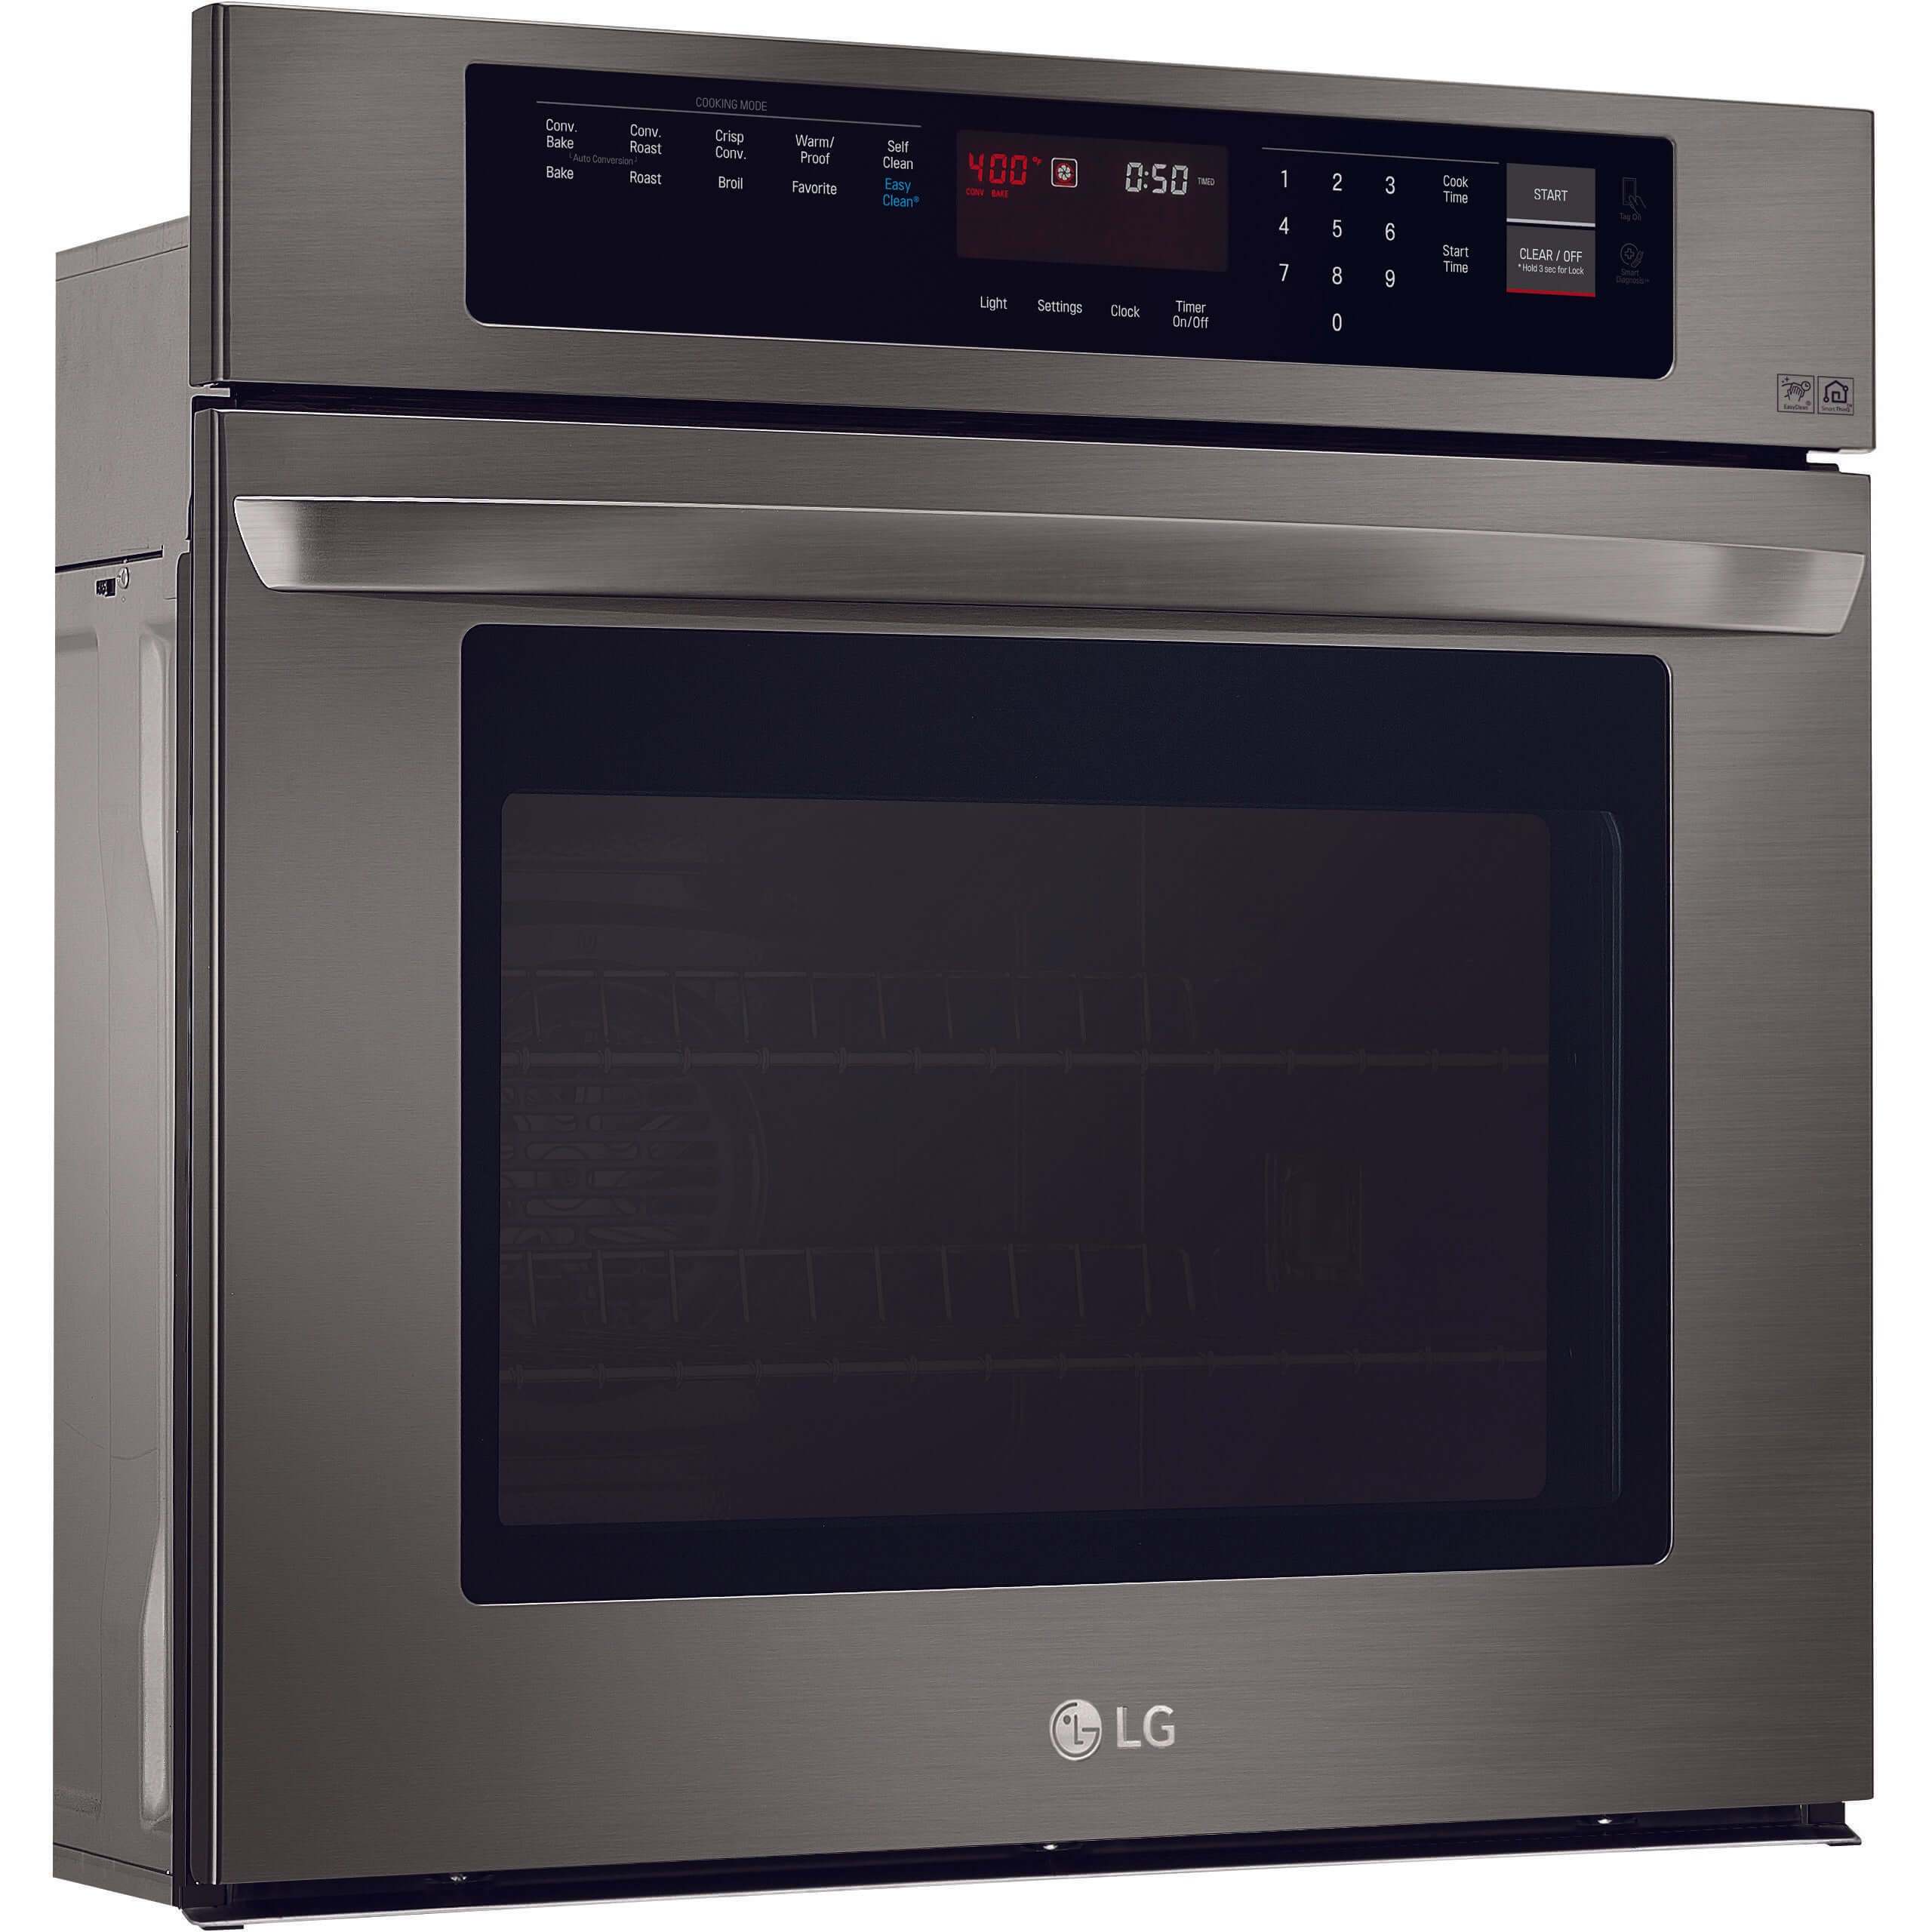 LG 30 in. Electric Single Wall Oven with True Convection in Black Stainless Steel (LWS3063BD)